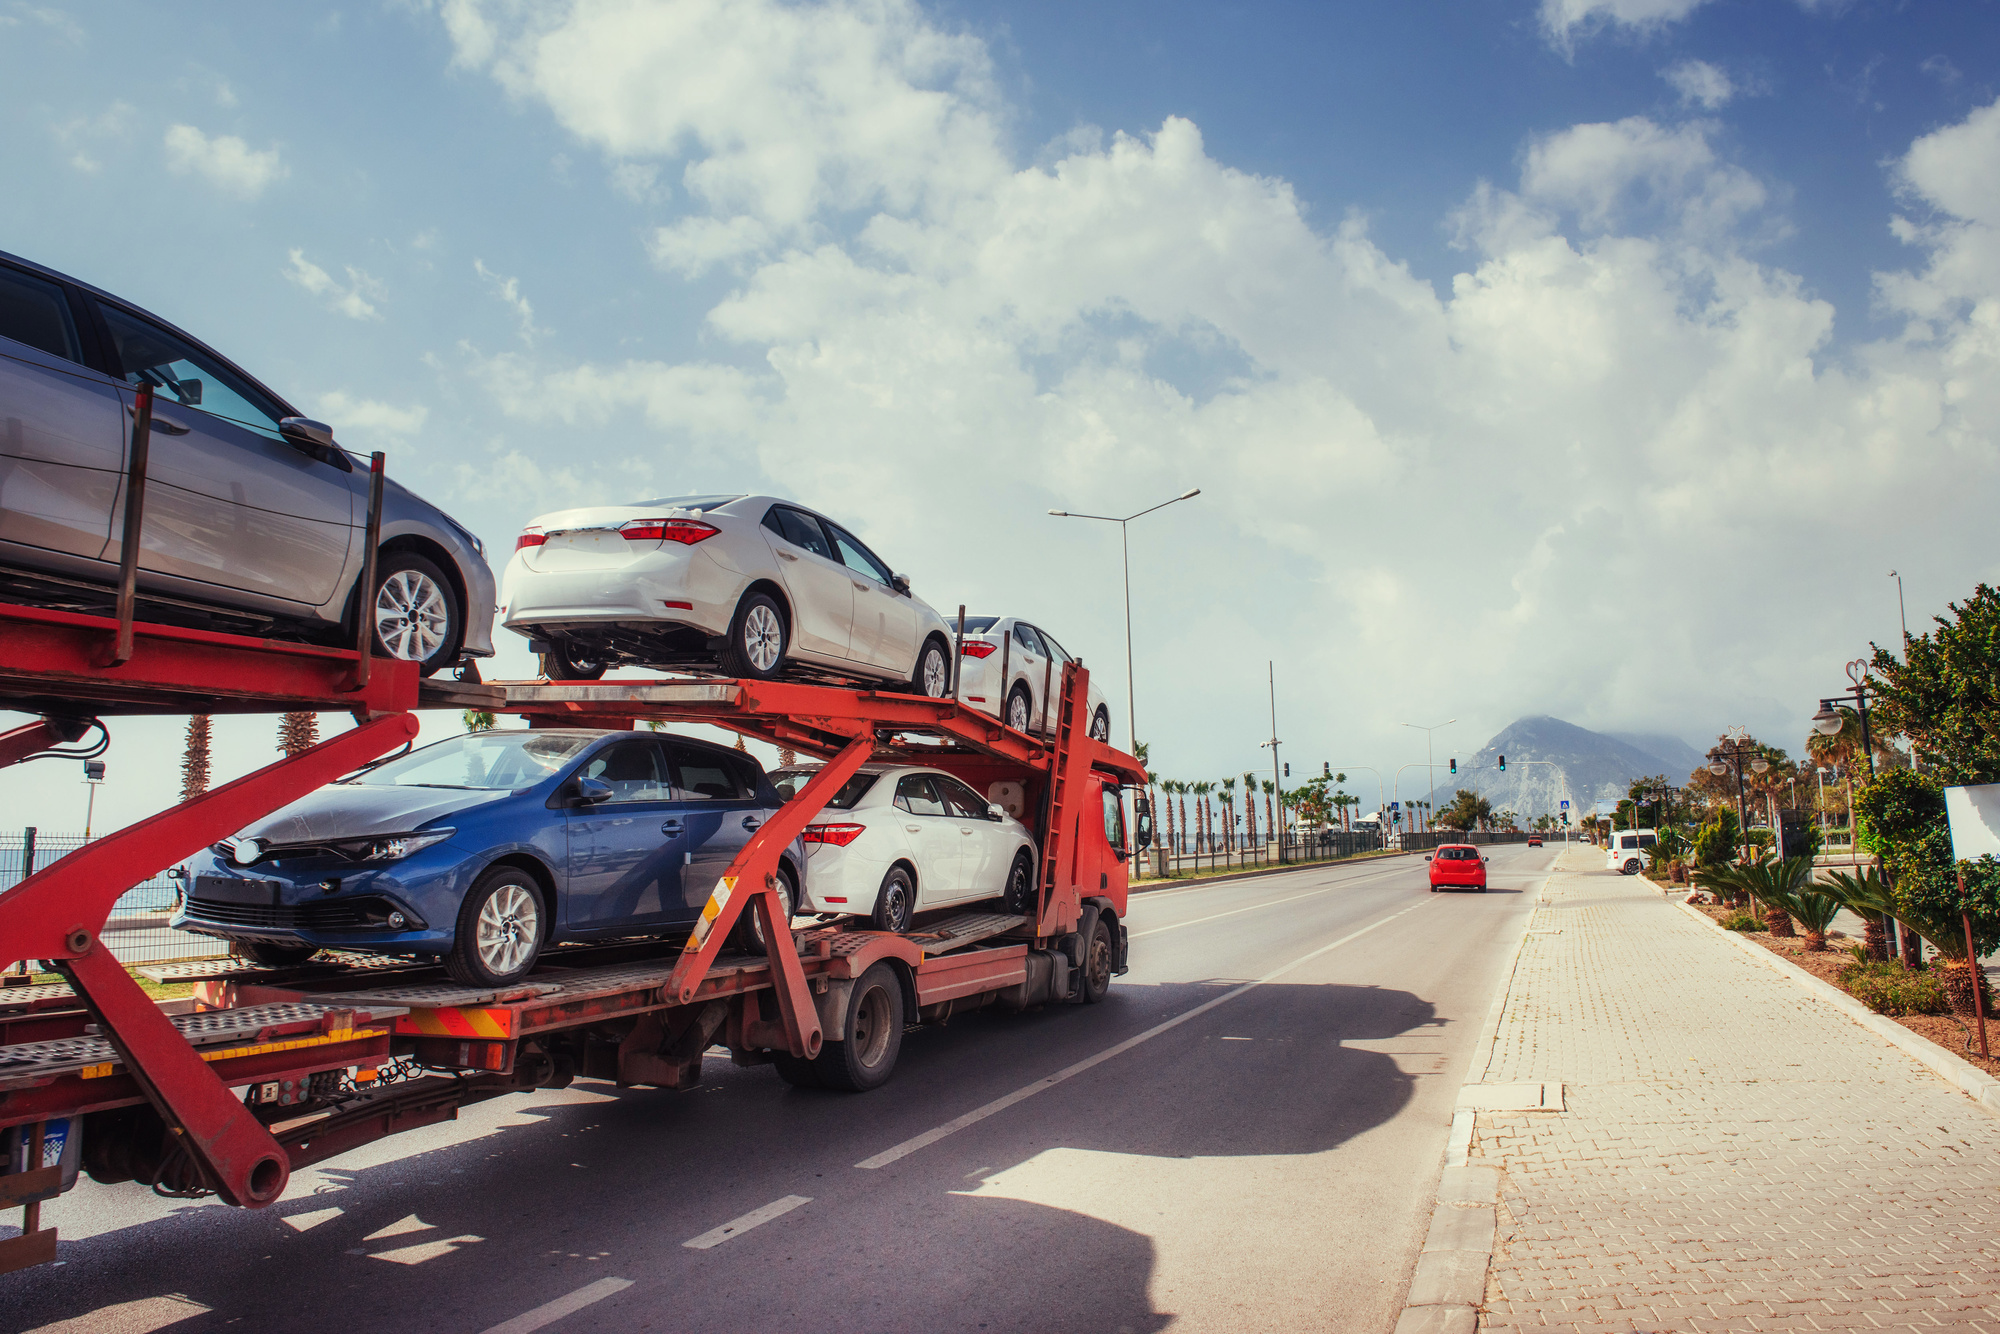 Finding the right professionals to transport your vehicle requires knowing your options. Here are factors to consider when selecting car shipping services.